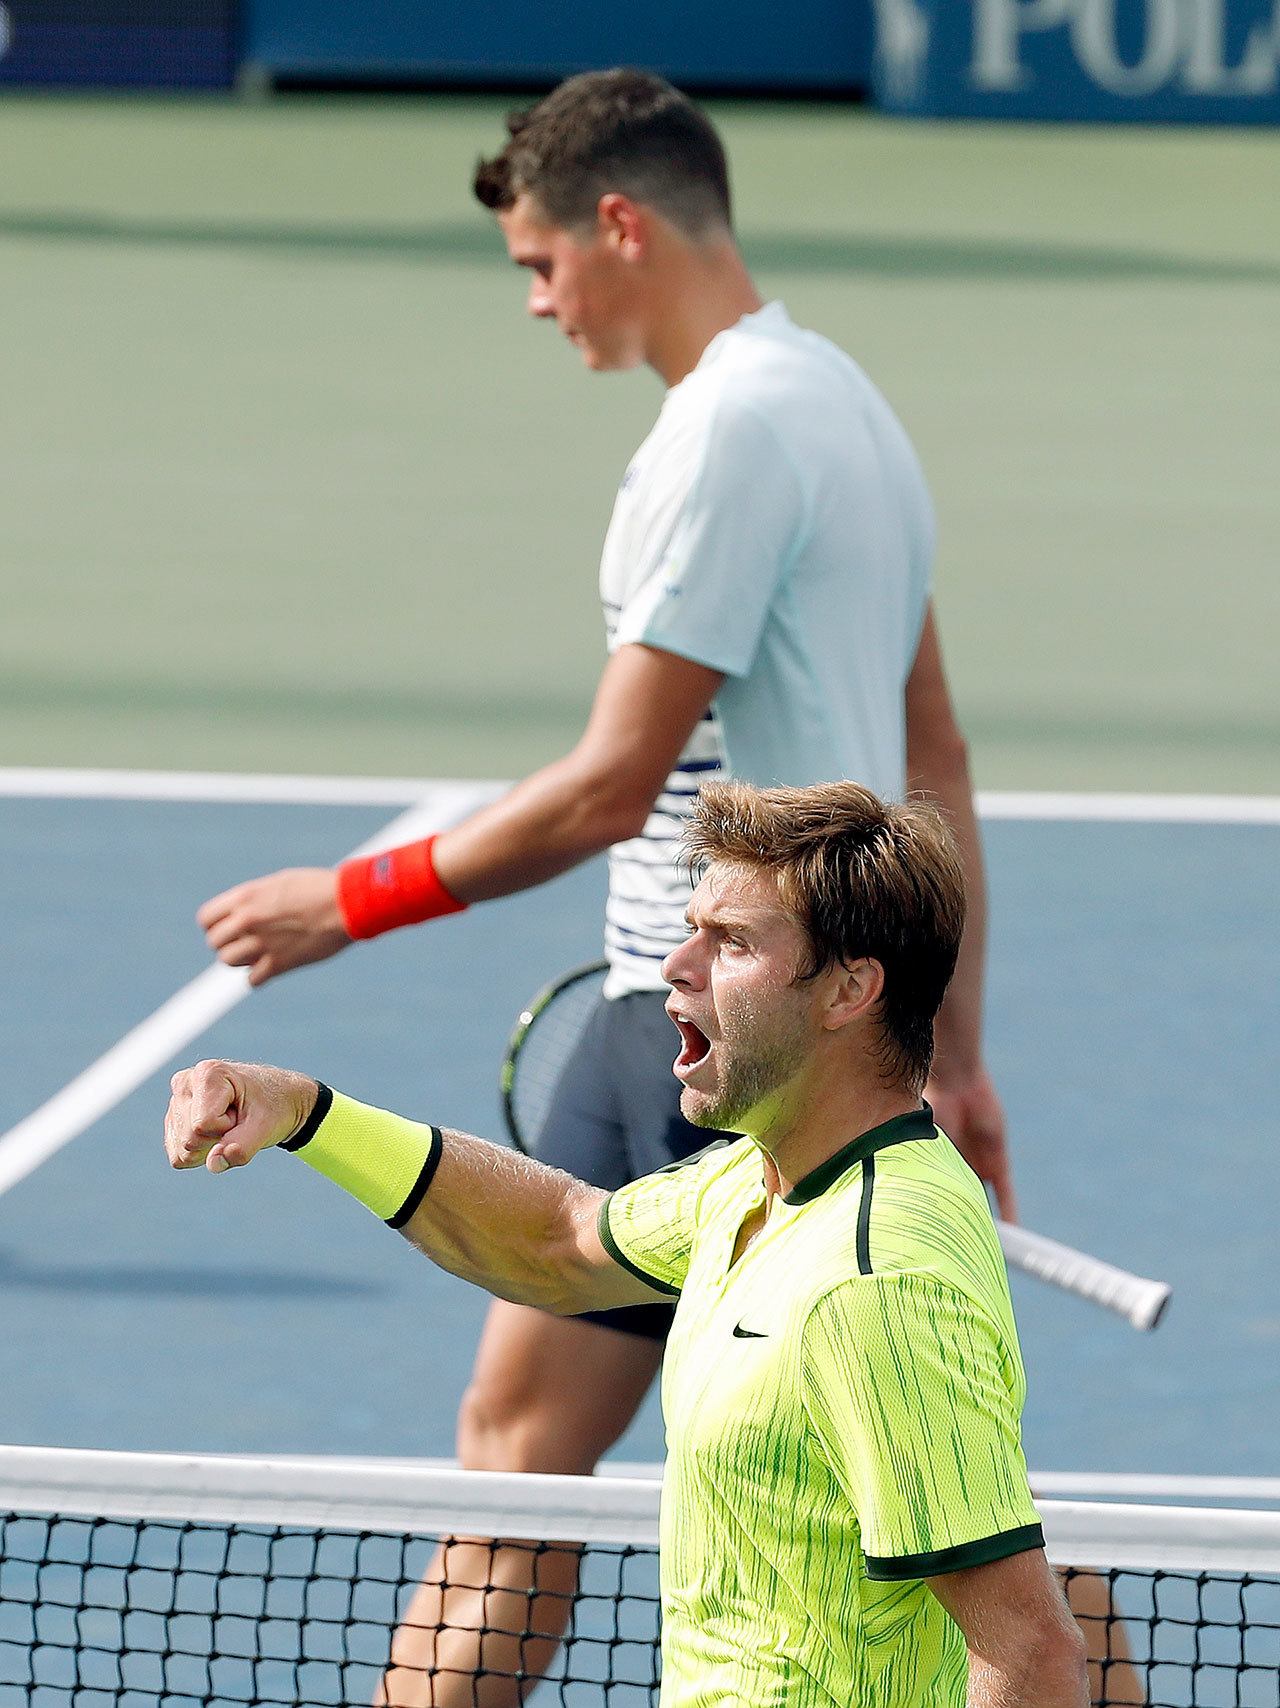 Ryan Harrison celebrates after winning a game against Milos Raonic during the second round of the U.S. Open on Wednesday in New York. Harrison went on to stun the fifth-seeded Raonic in four sets. (AP Photo/Alex Brandon)